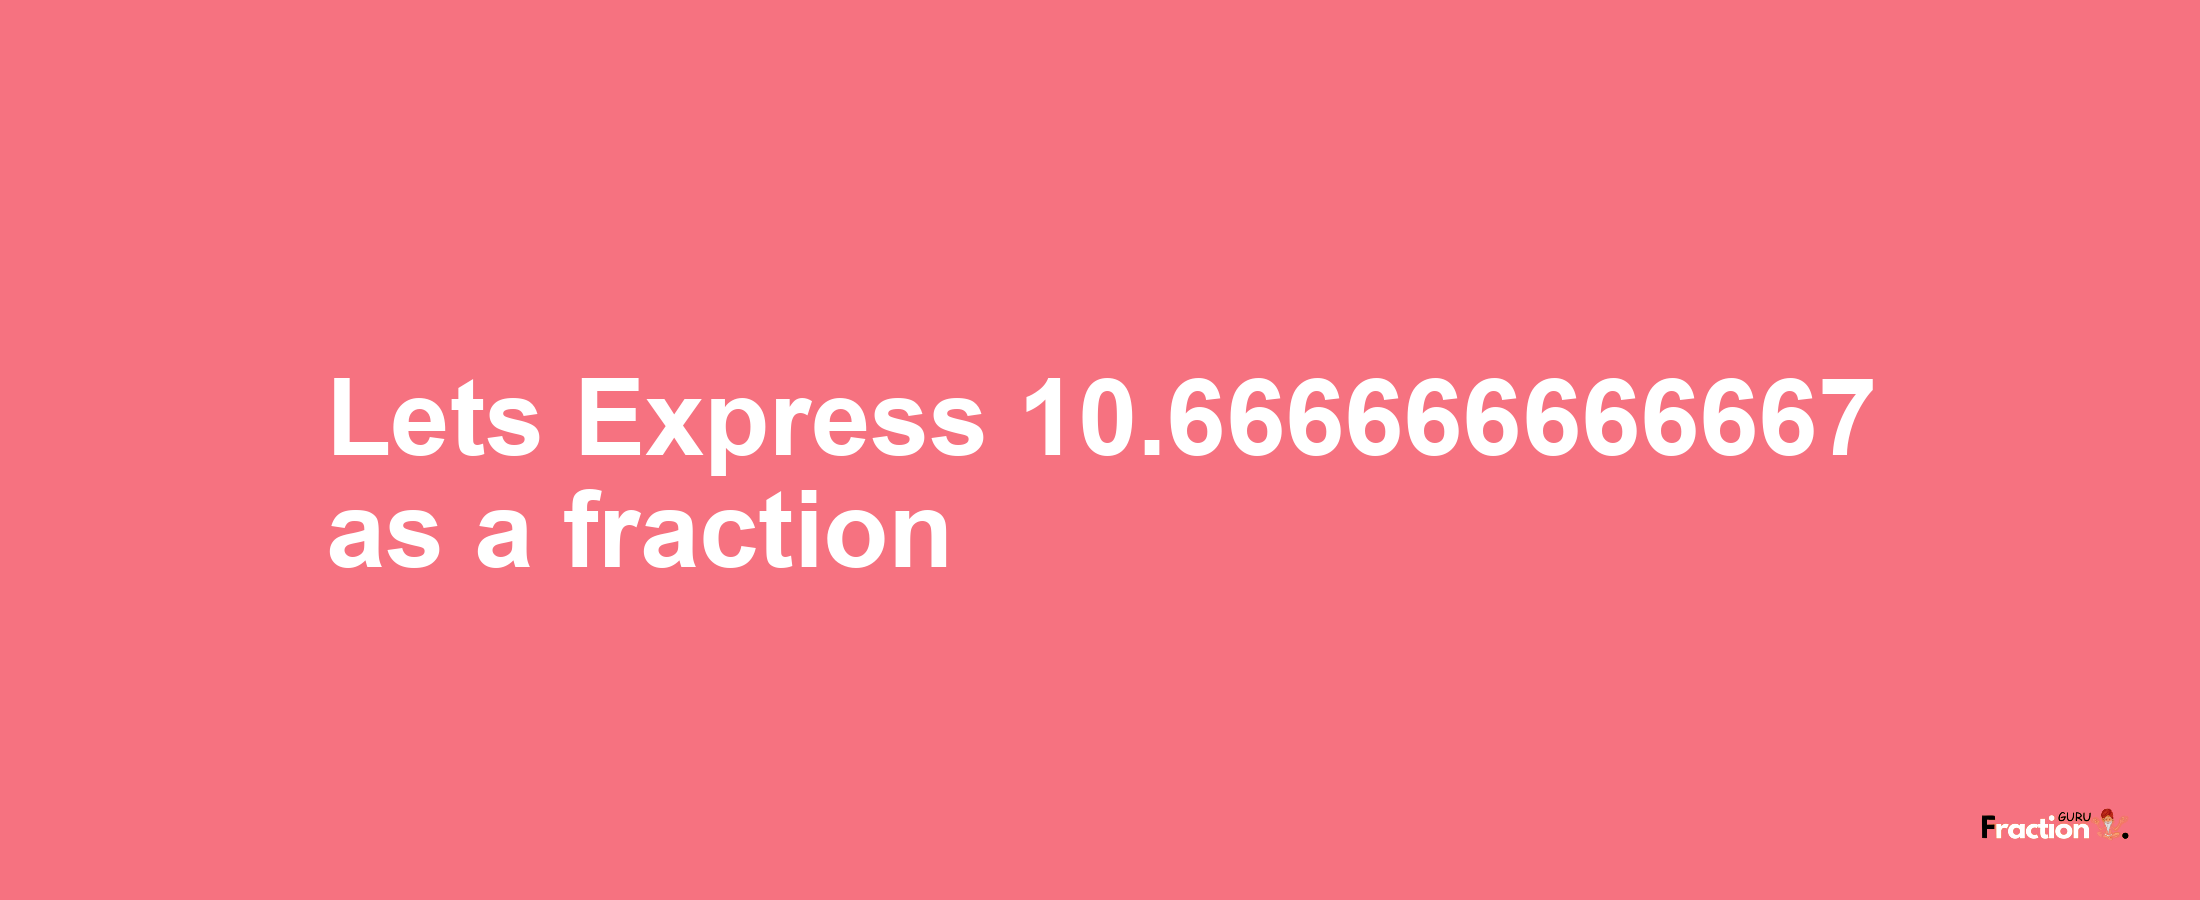 Lets Express 10.666666666667 as afraction